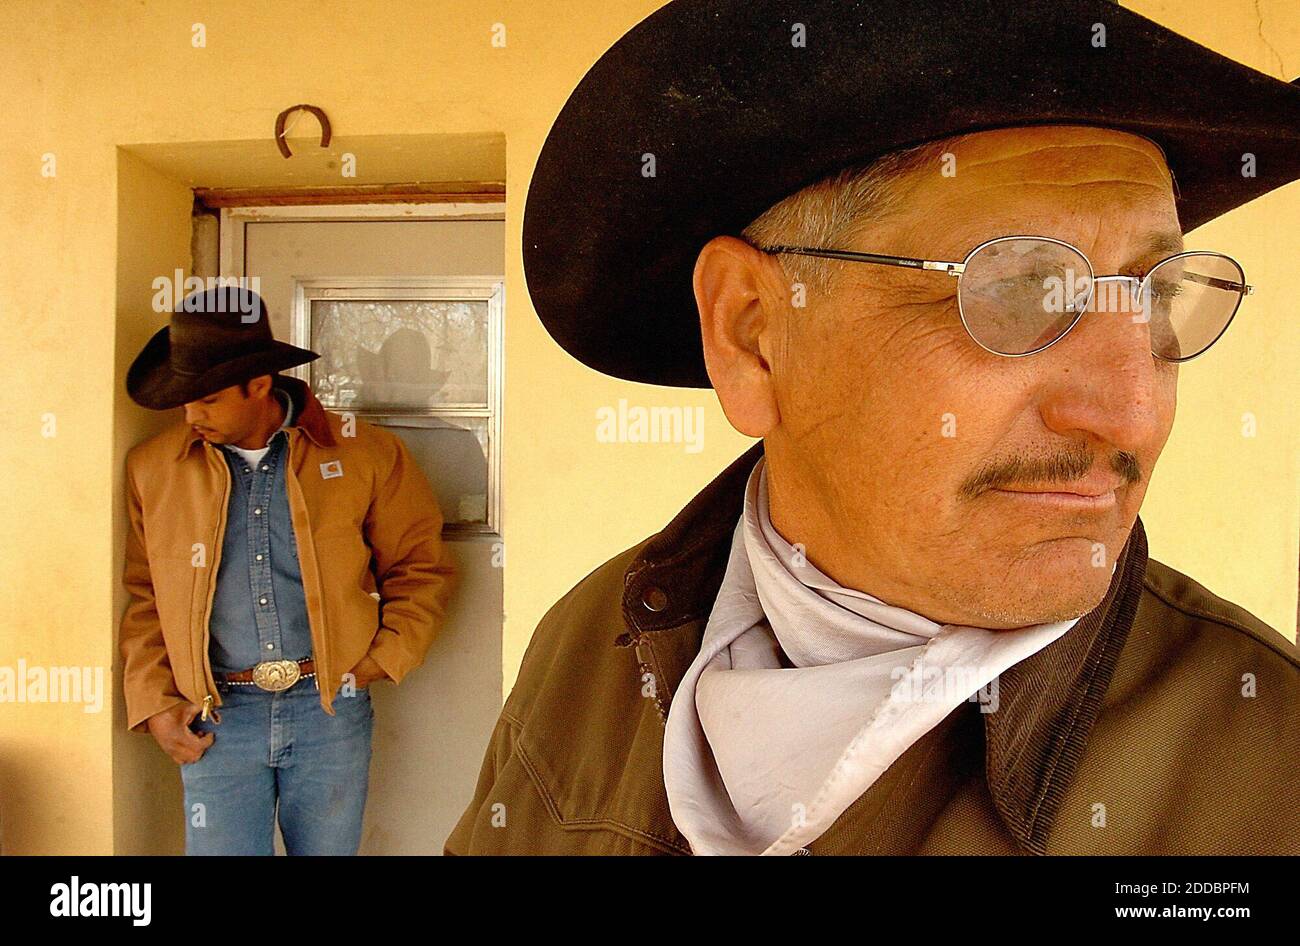 NO FILM, NO VIDEO, NO TV, NO DOCUMENTARY - Rancher Plutarco Eli'as (right) tends 600 acres in Arivaca, Arizona. He says he frequently see migrants passing through. 'They're not stopping it, they just divert them around,' he says. Jesu's Morgan (left) also works the ranch. Photo by Patrick Schneider/Charlotte Observer/KRT/ABACAPRESS.COM Stock Photo